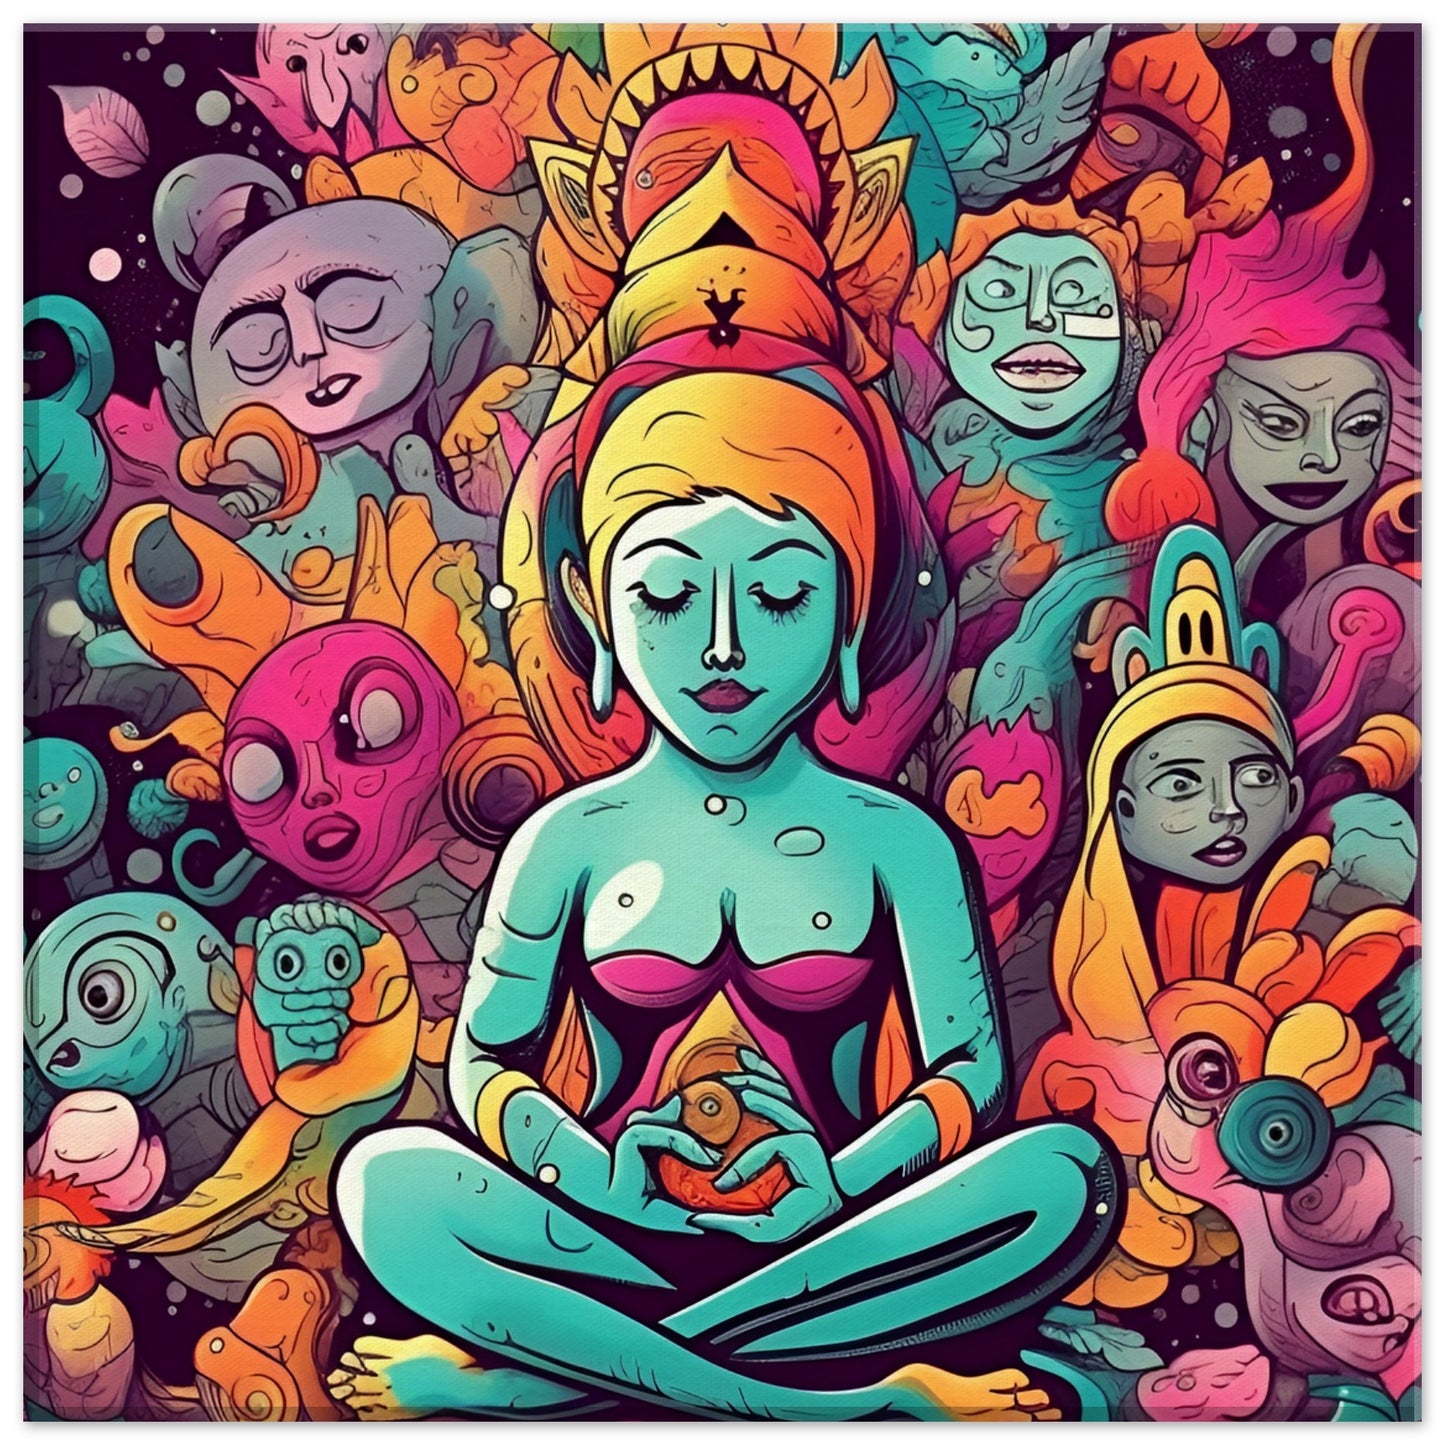 Colorful Om